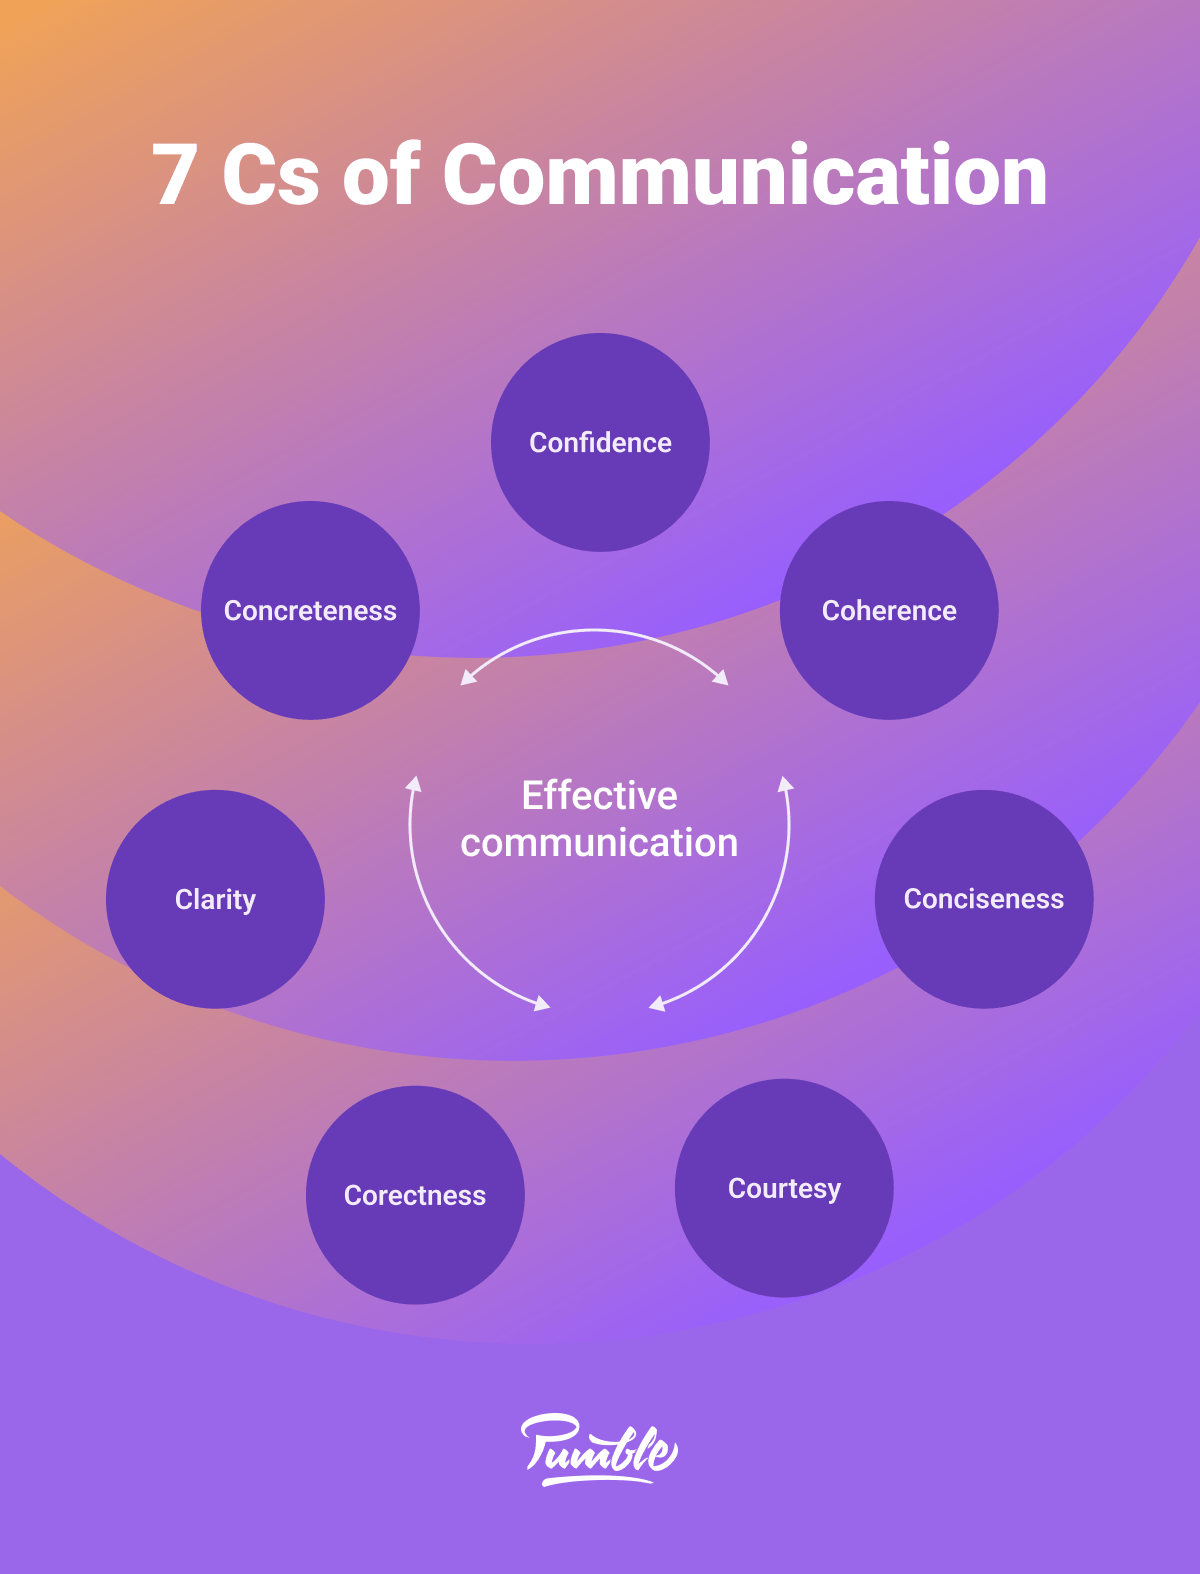 effective communication pictures